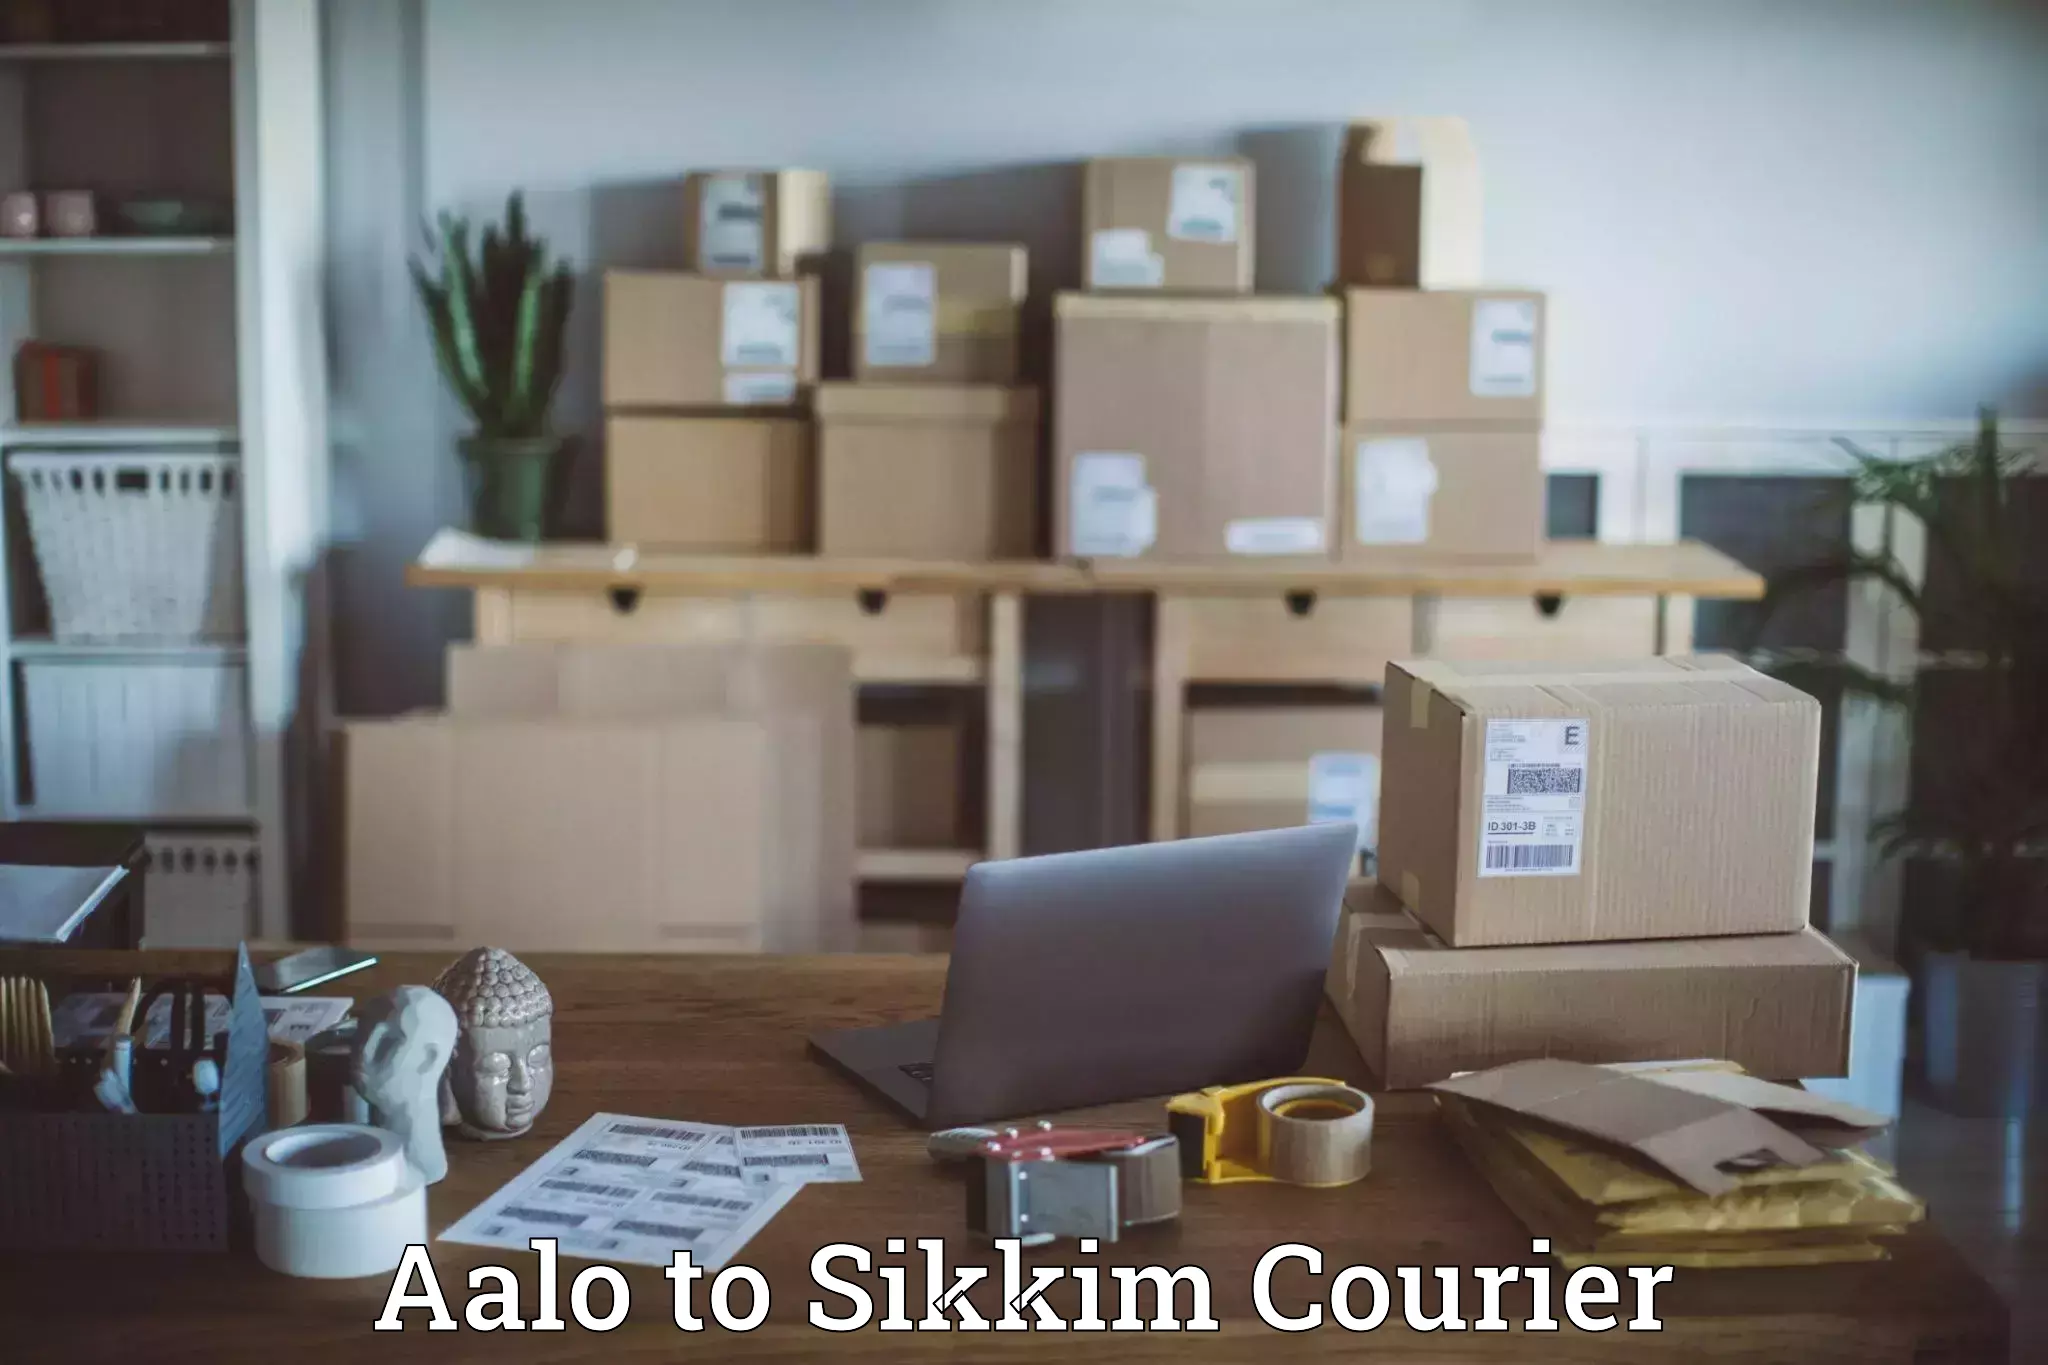 Express package handling Aalo to Sikkim